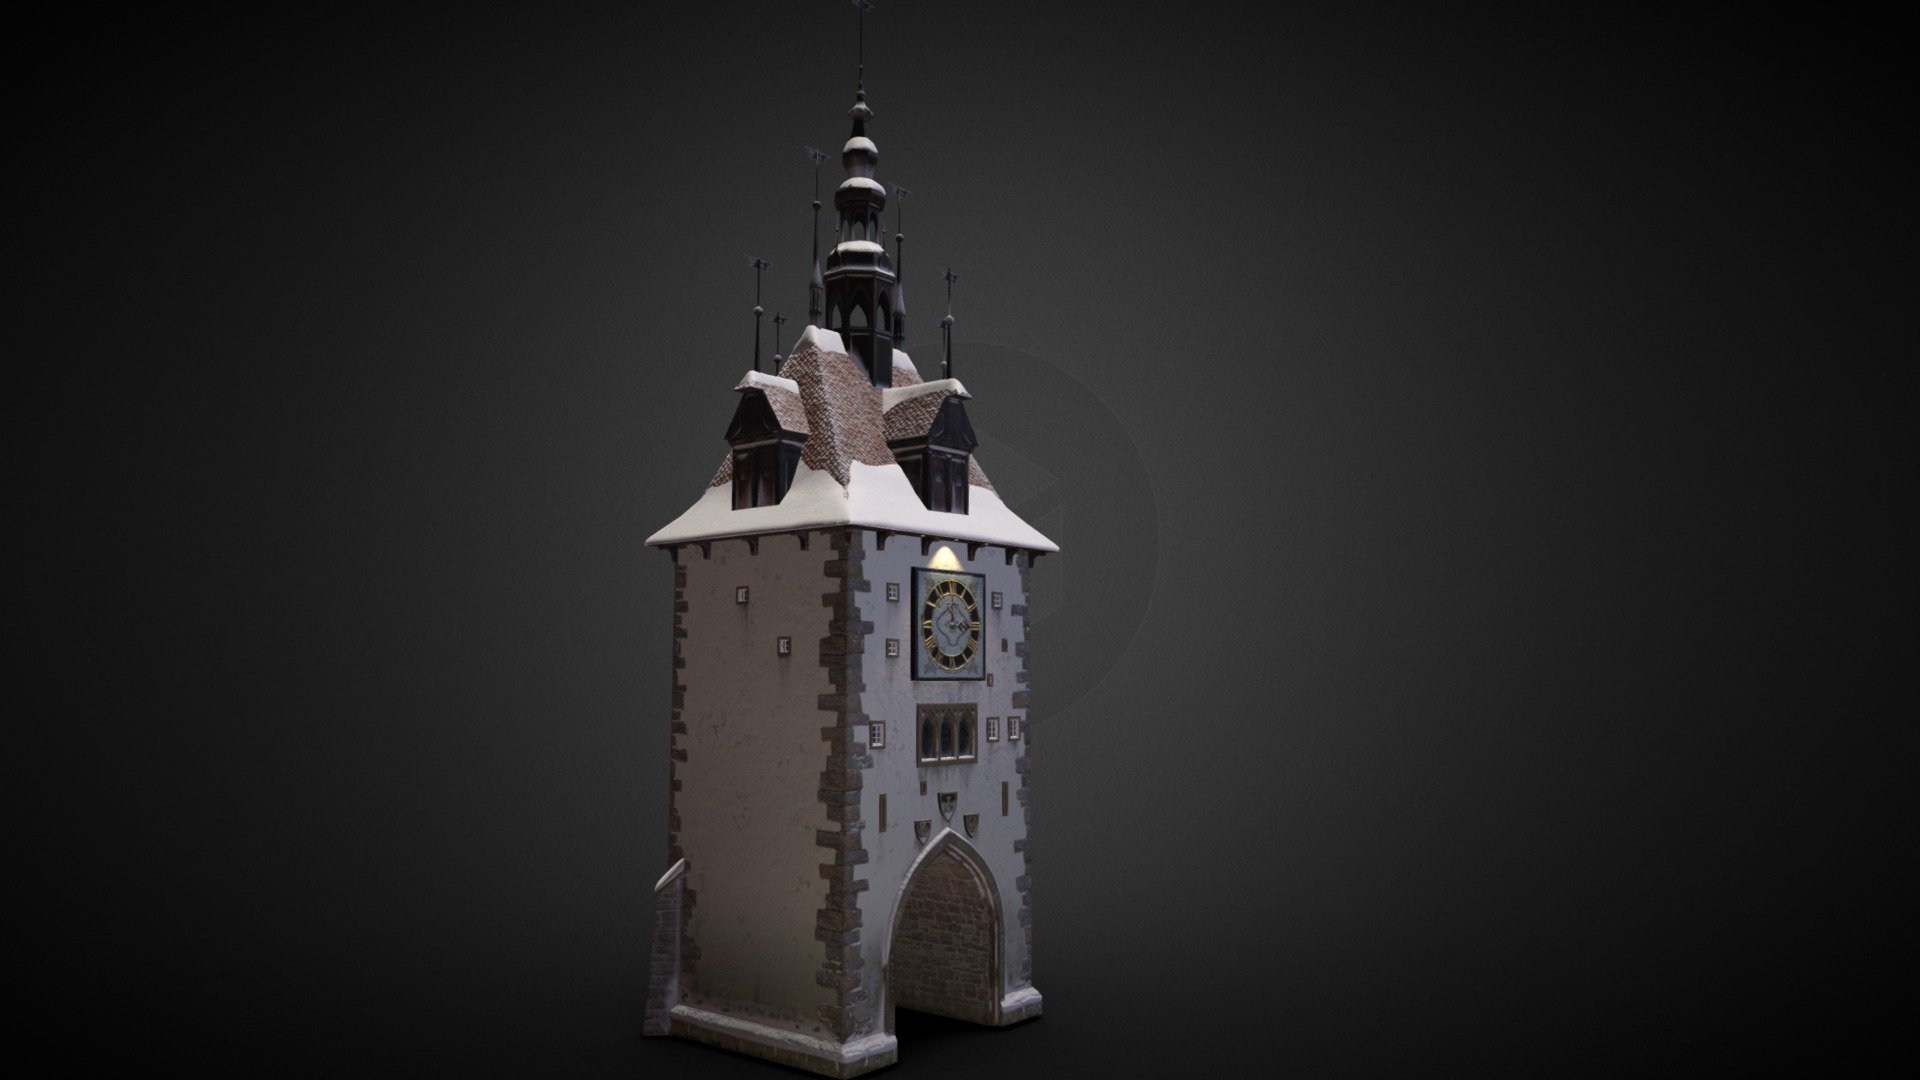 Gate Tower is lowpoly model. It is one of models of &ldquo;Town Square Christmas